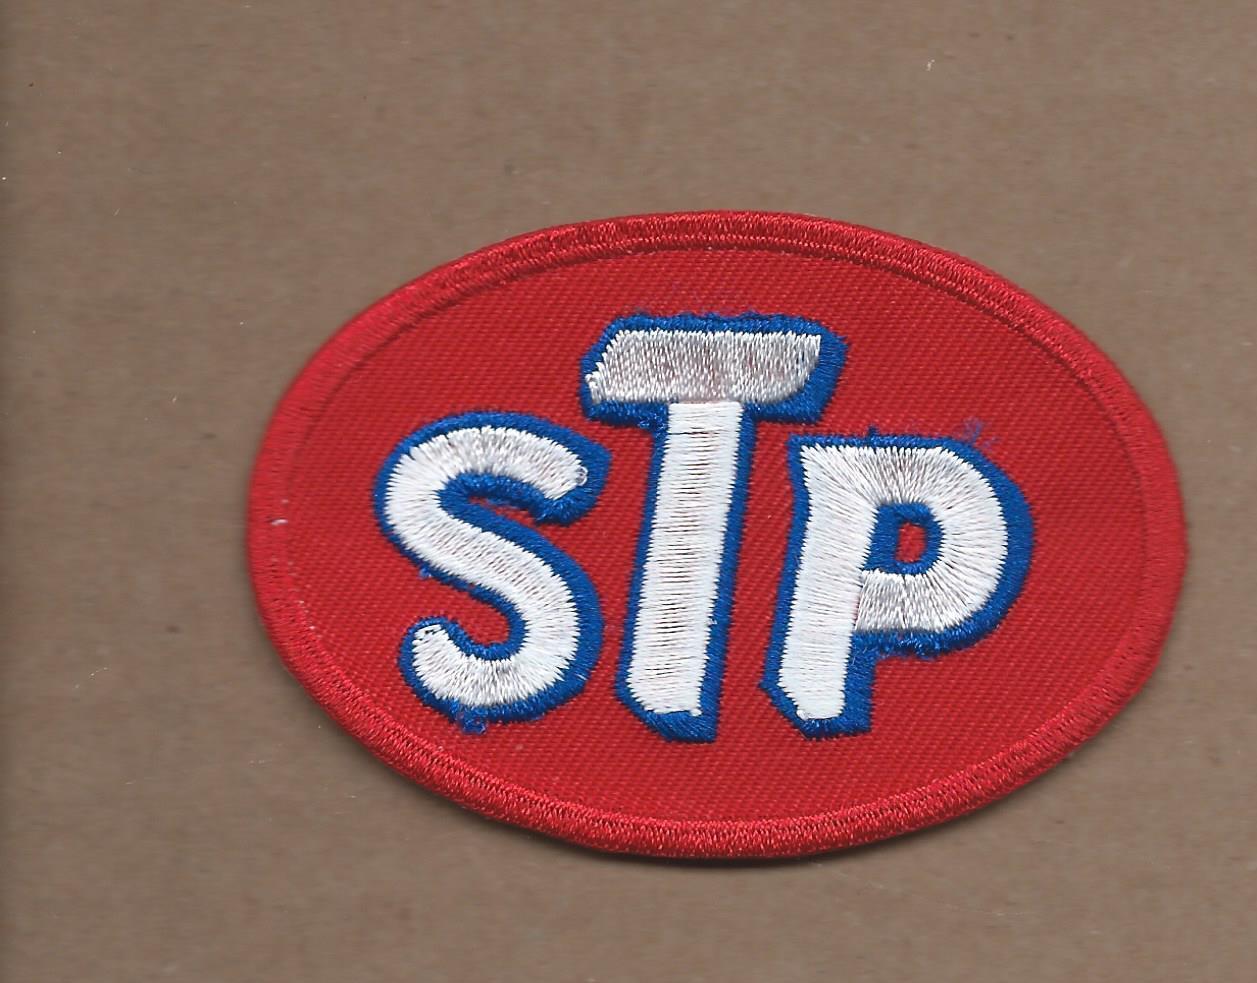 NEW 2 1/8 X 3 1/8 INCH STP MOTOR OIL IRON ON PATCH 